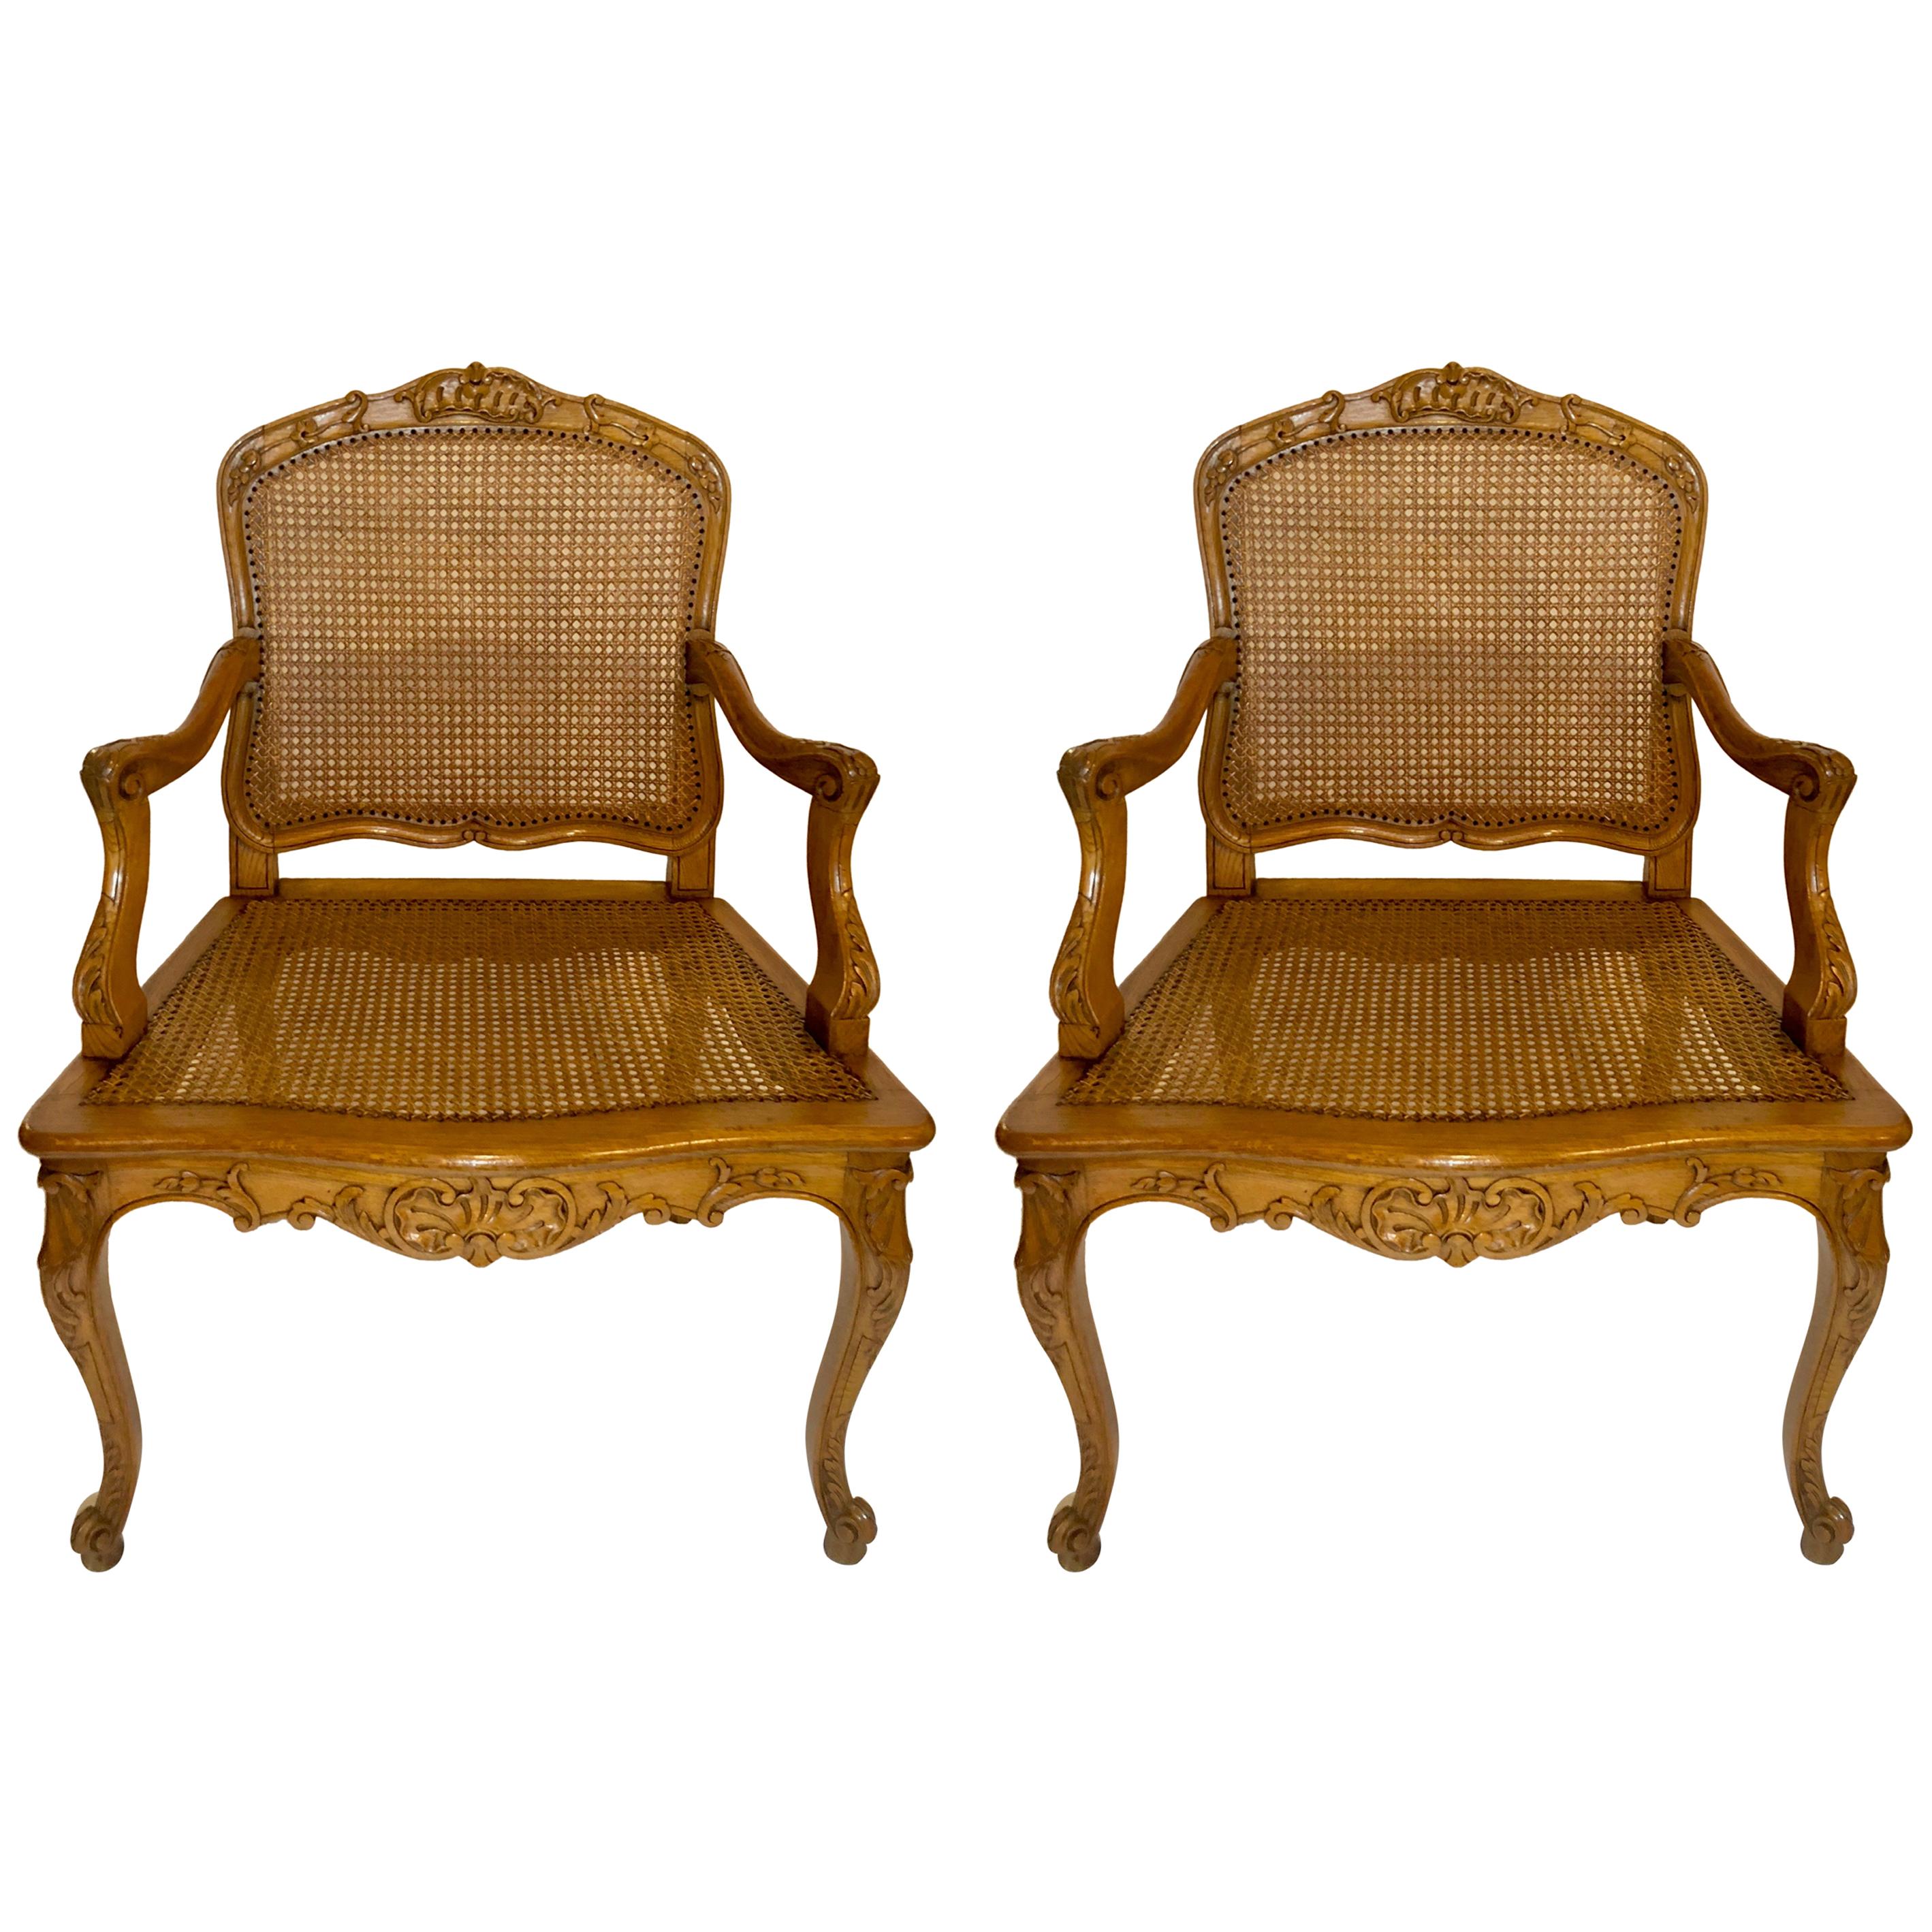 Pair of French Antique Carved Elm Armchairs, circa 1910-1920